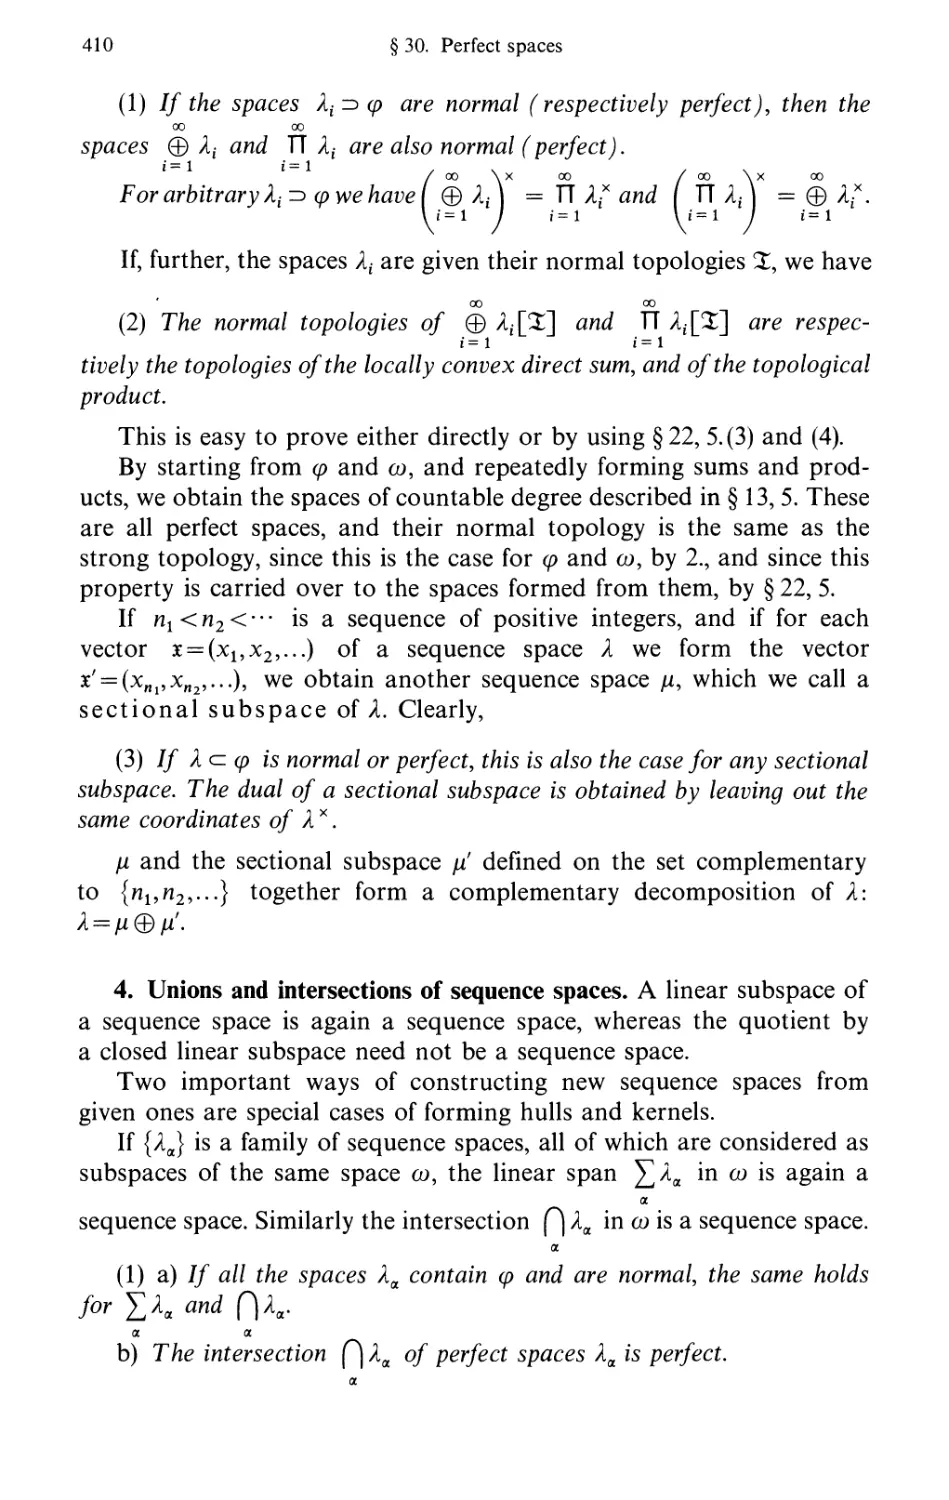 4. Unions and intersections of sequence spaces